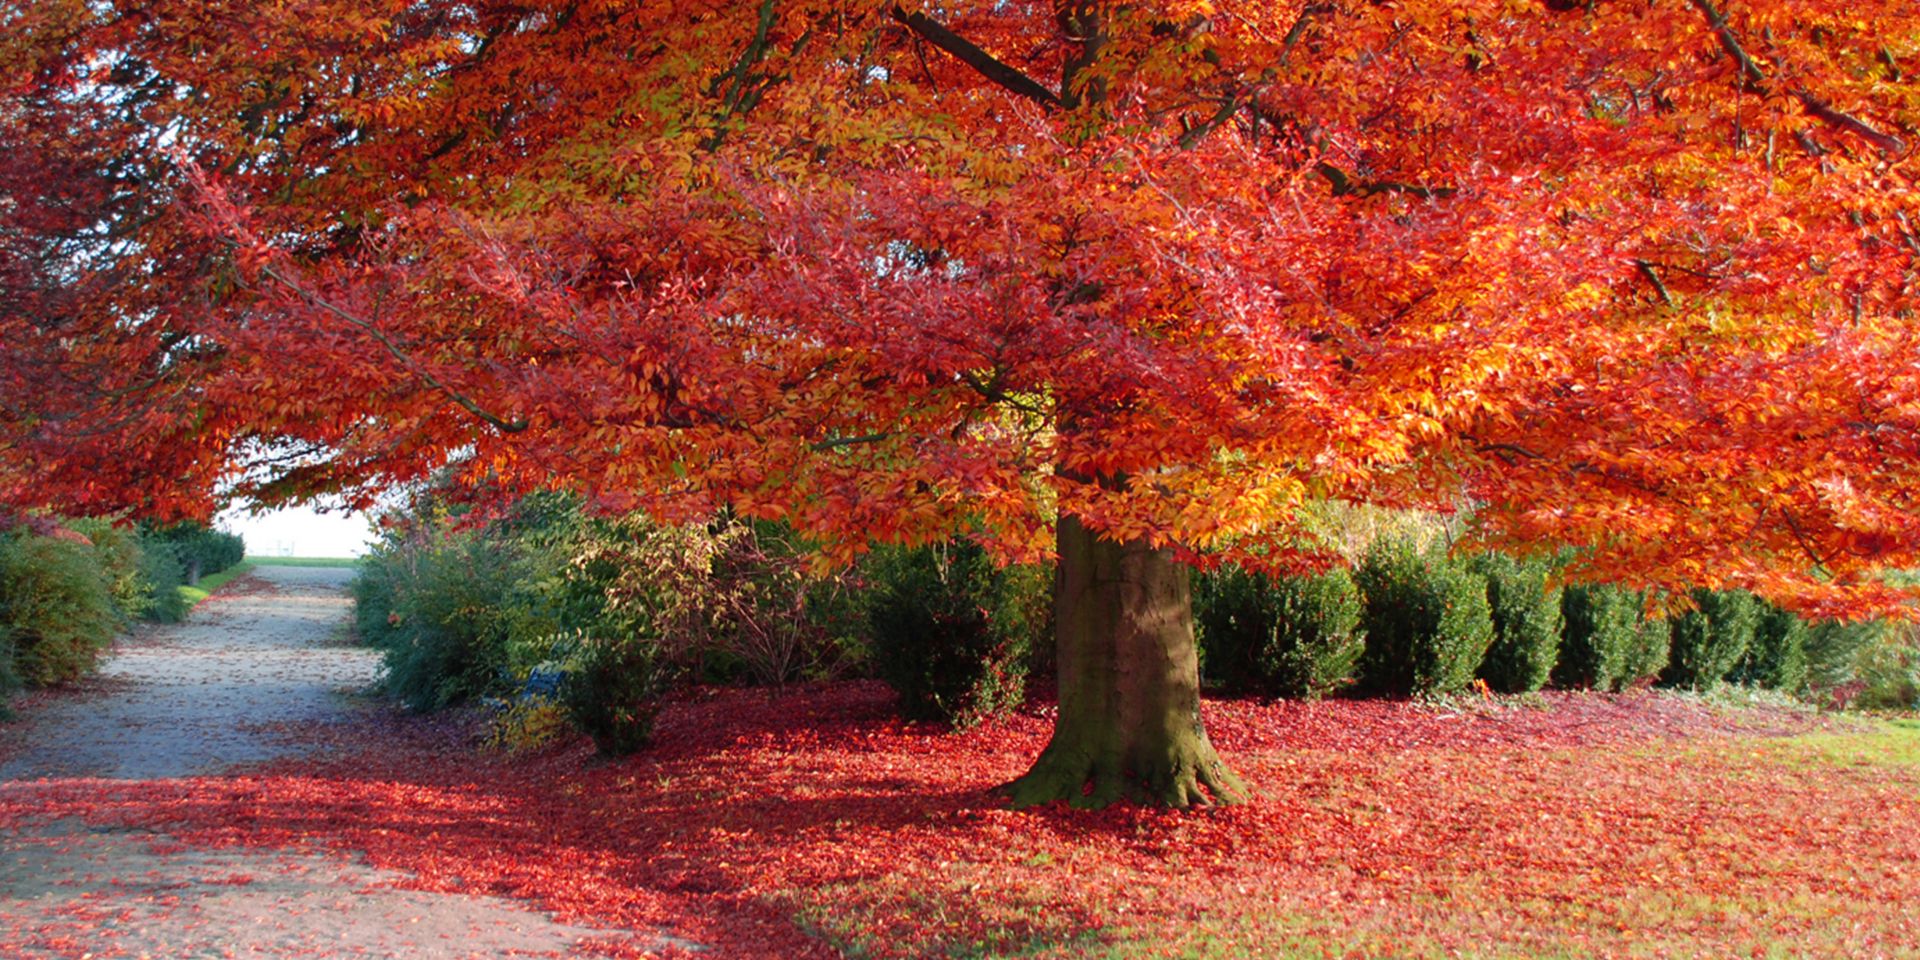 expansive tree in fall